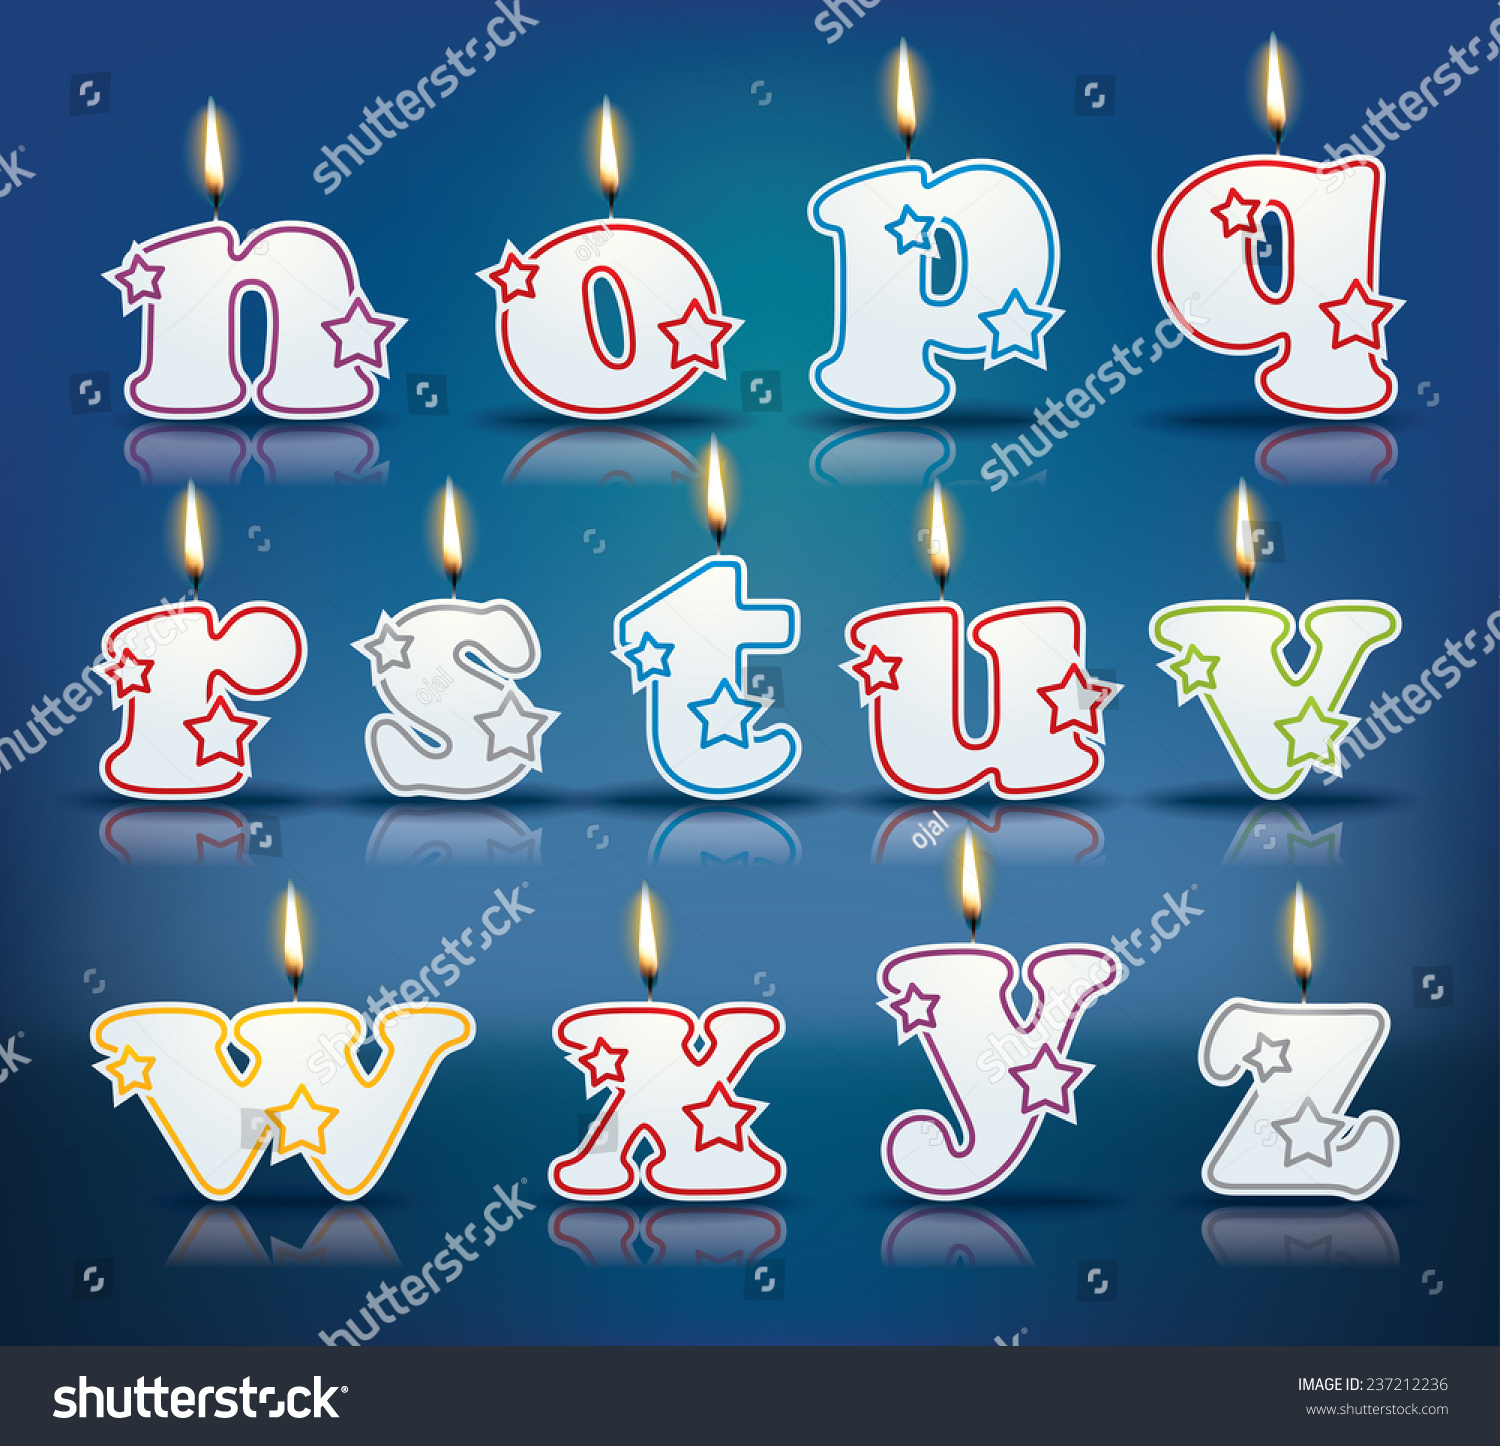 SVG of Candle letters from n to z with flames - eps 10 vector illustration svg